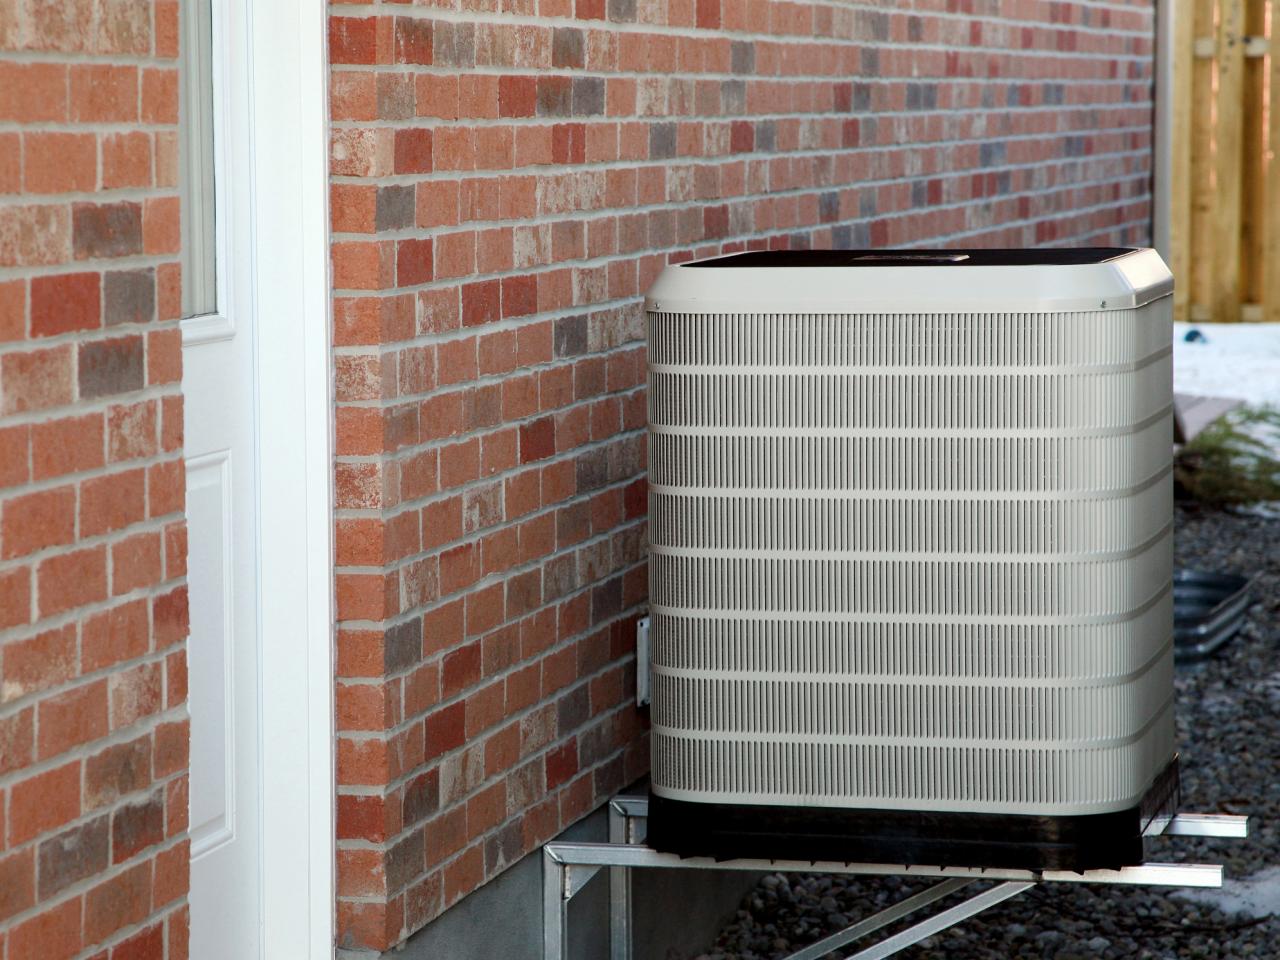 What are the Benefits of Having a Heat Pump?